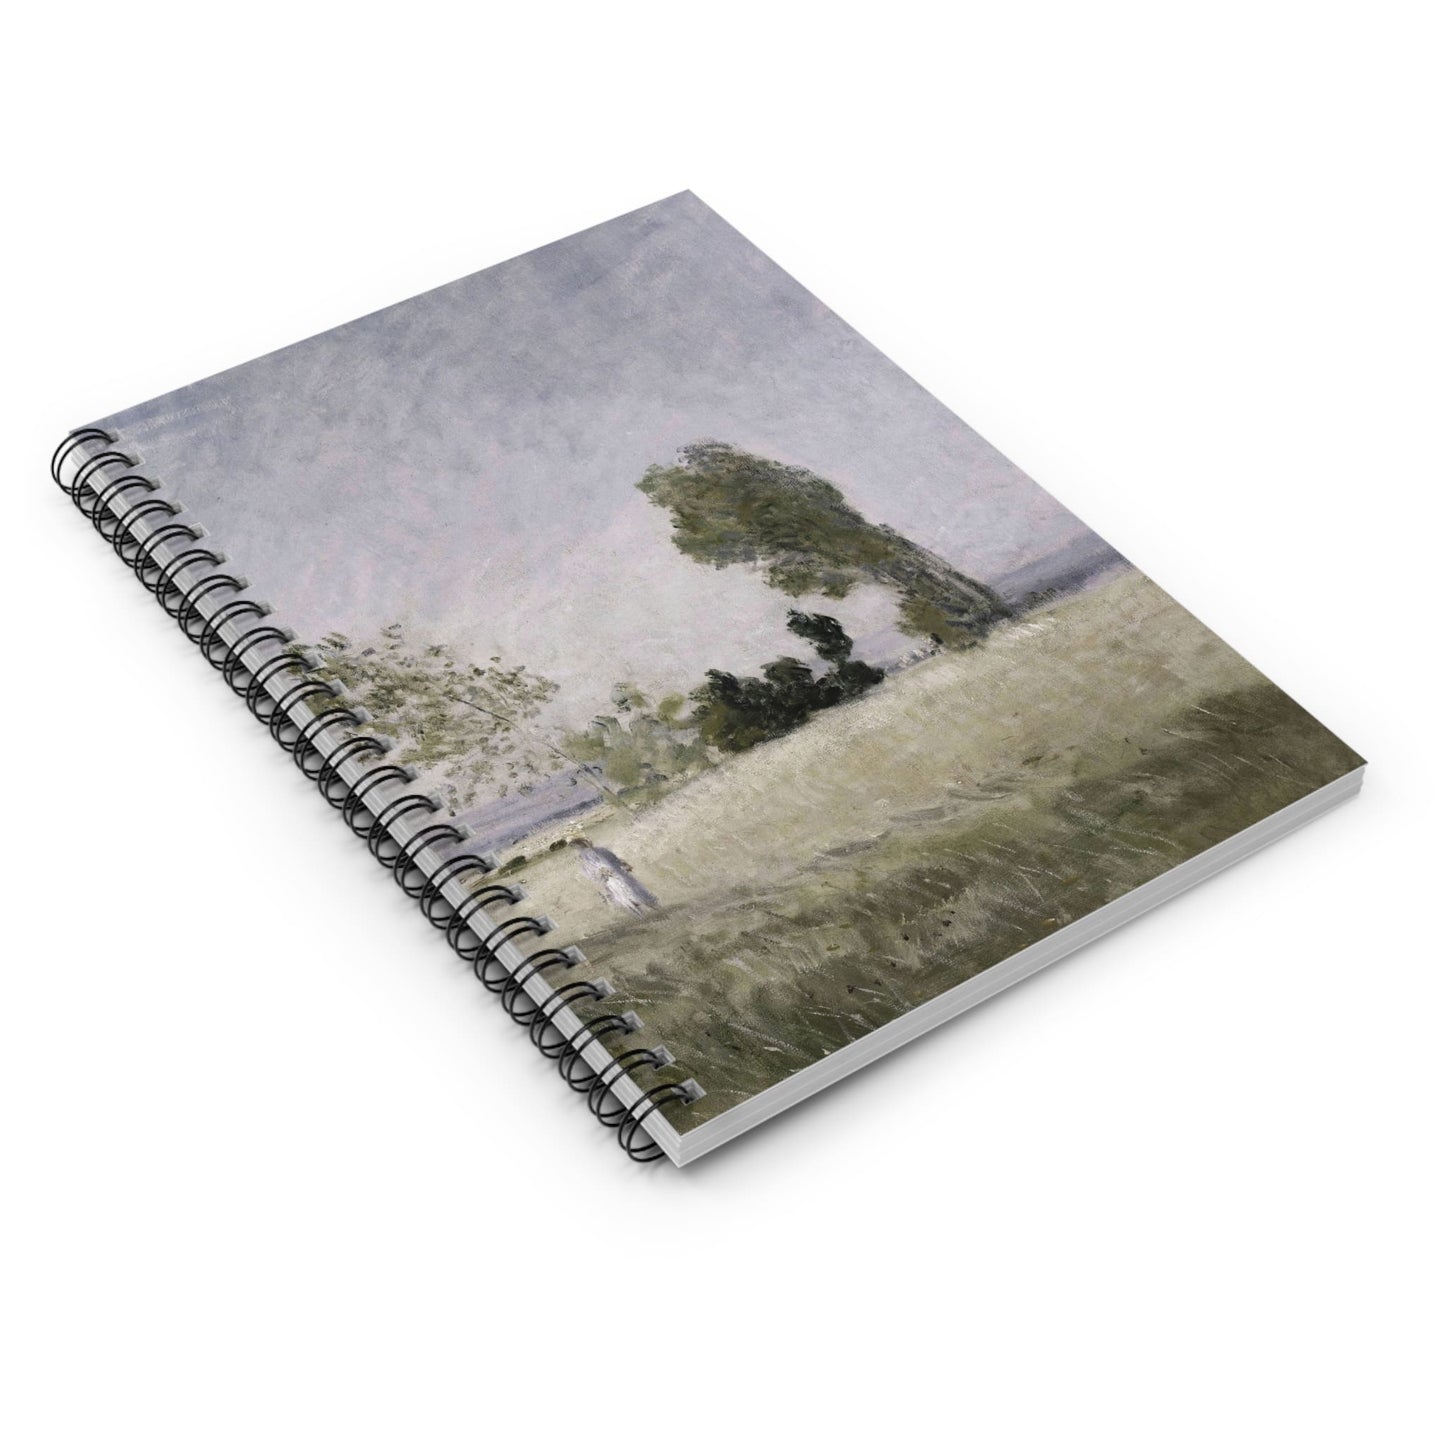 Old-Timey Get Away Spiral Notebook Laying Flat on White Surface